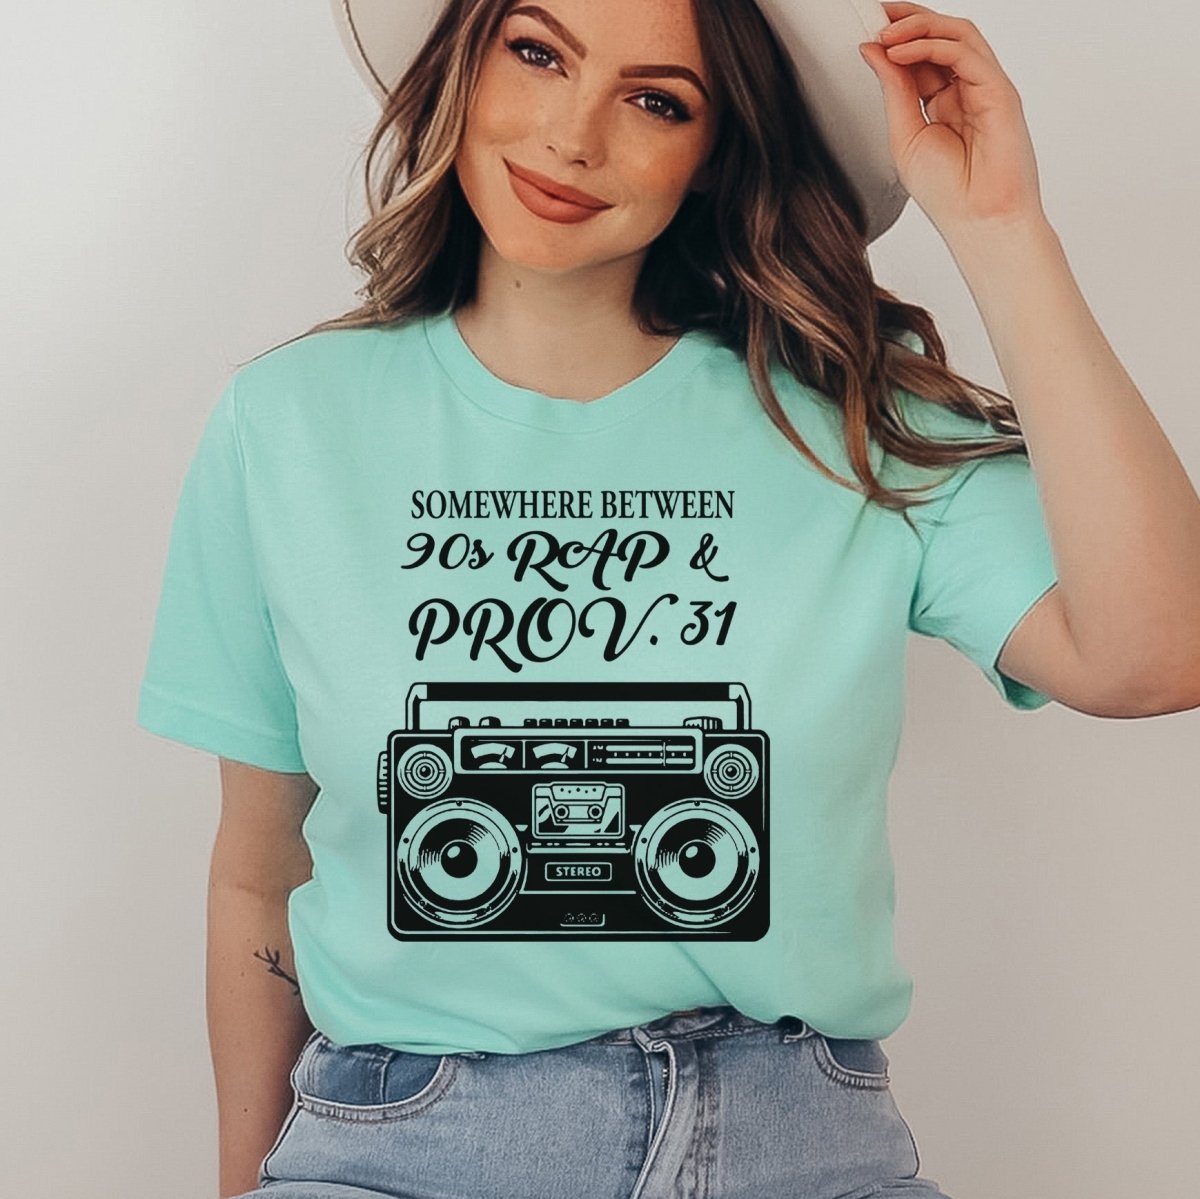 90s Rap and Proverbs 31 Tee - Limeberry Designs